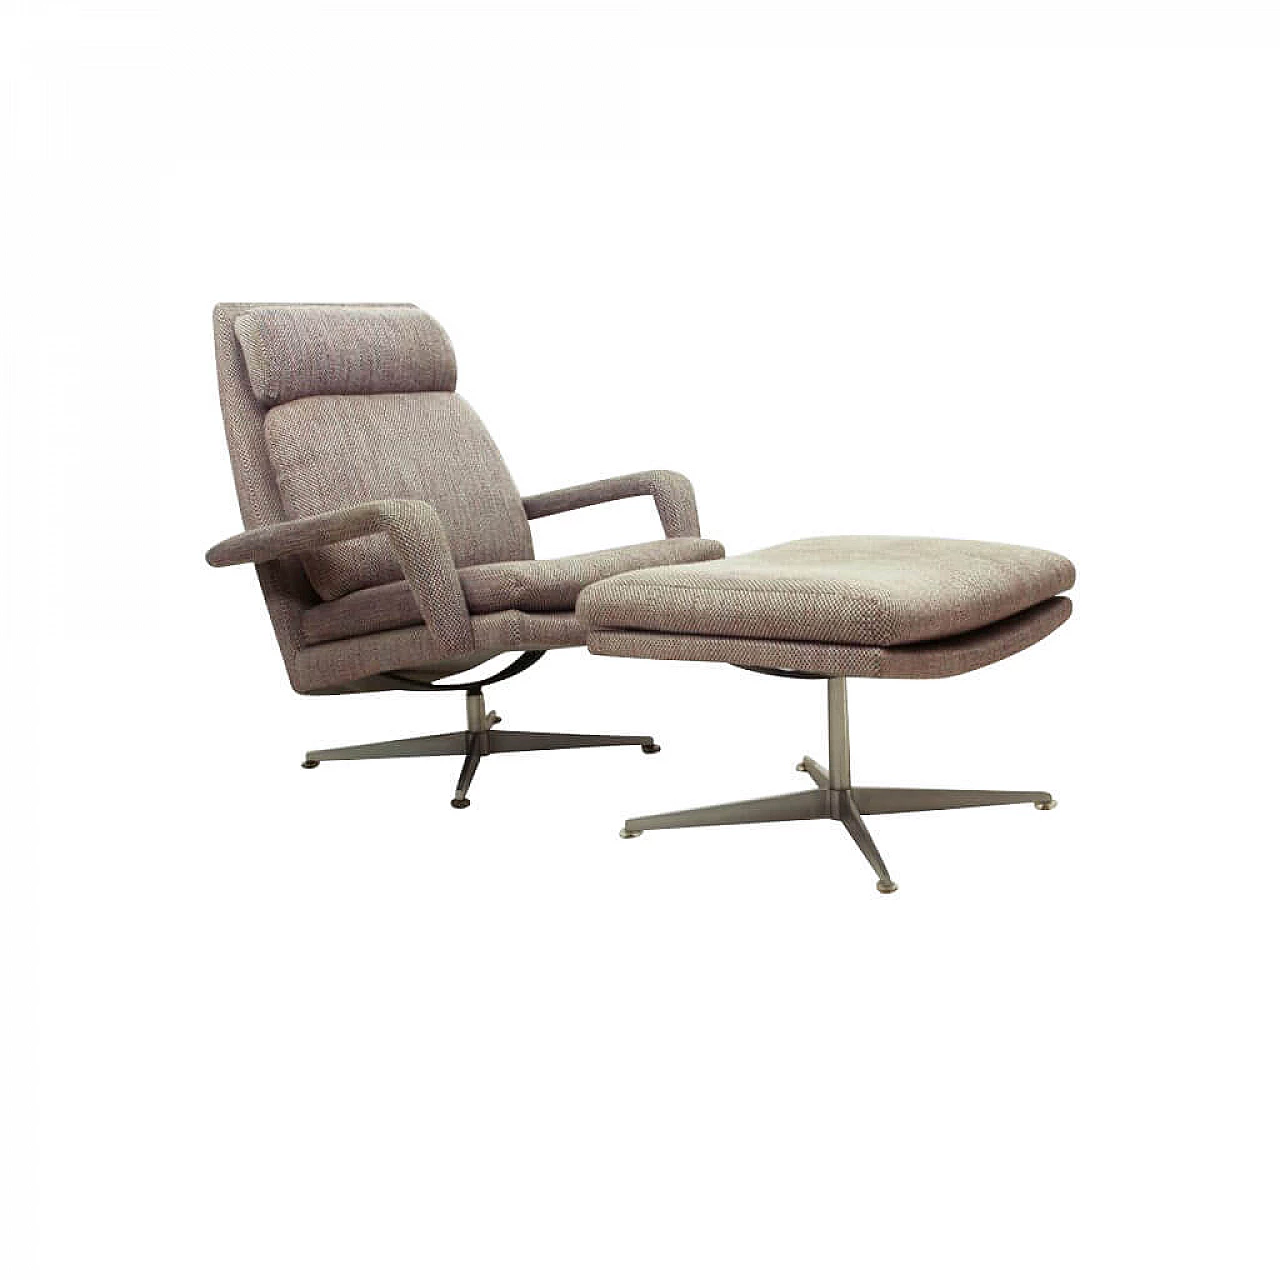 German lounge chair with ottoman in chromed metal and fabric by Hans Kaufeld, 60s 1235129